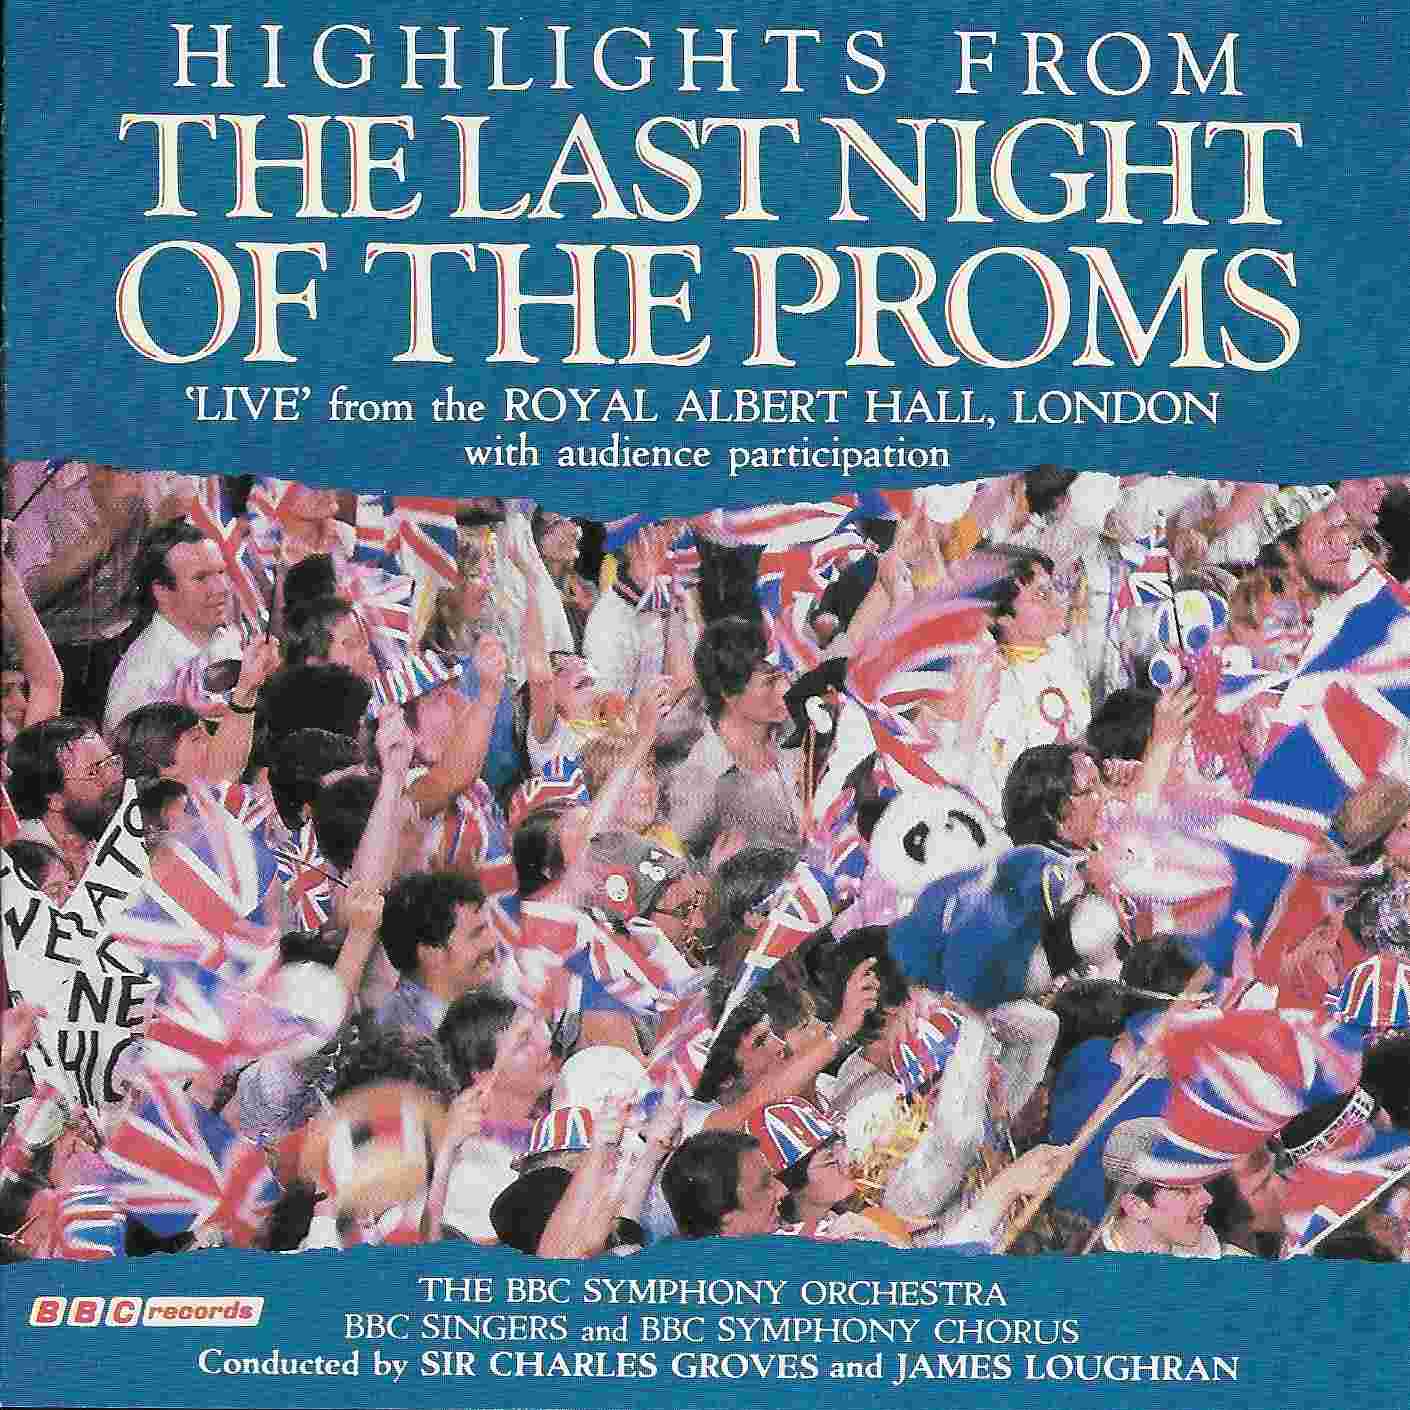 Picture of Last night of the proms by artist Various from the BBC cds - Records and Tapes library